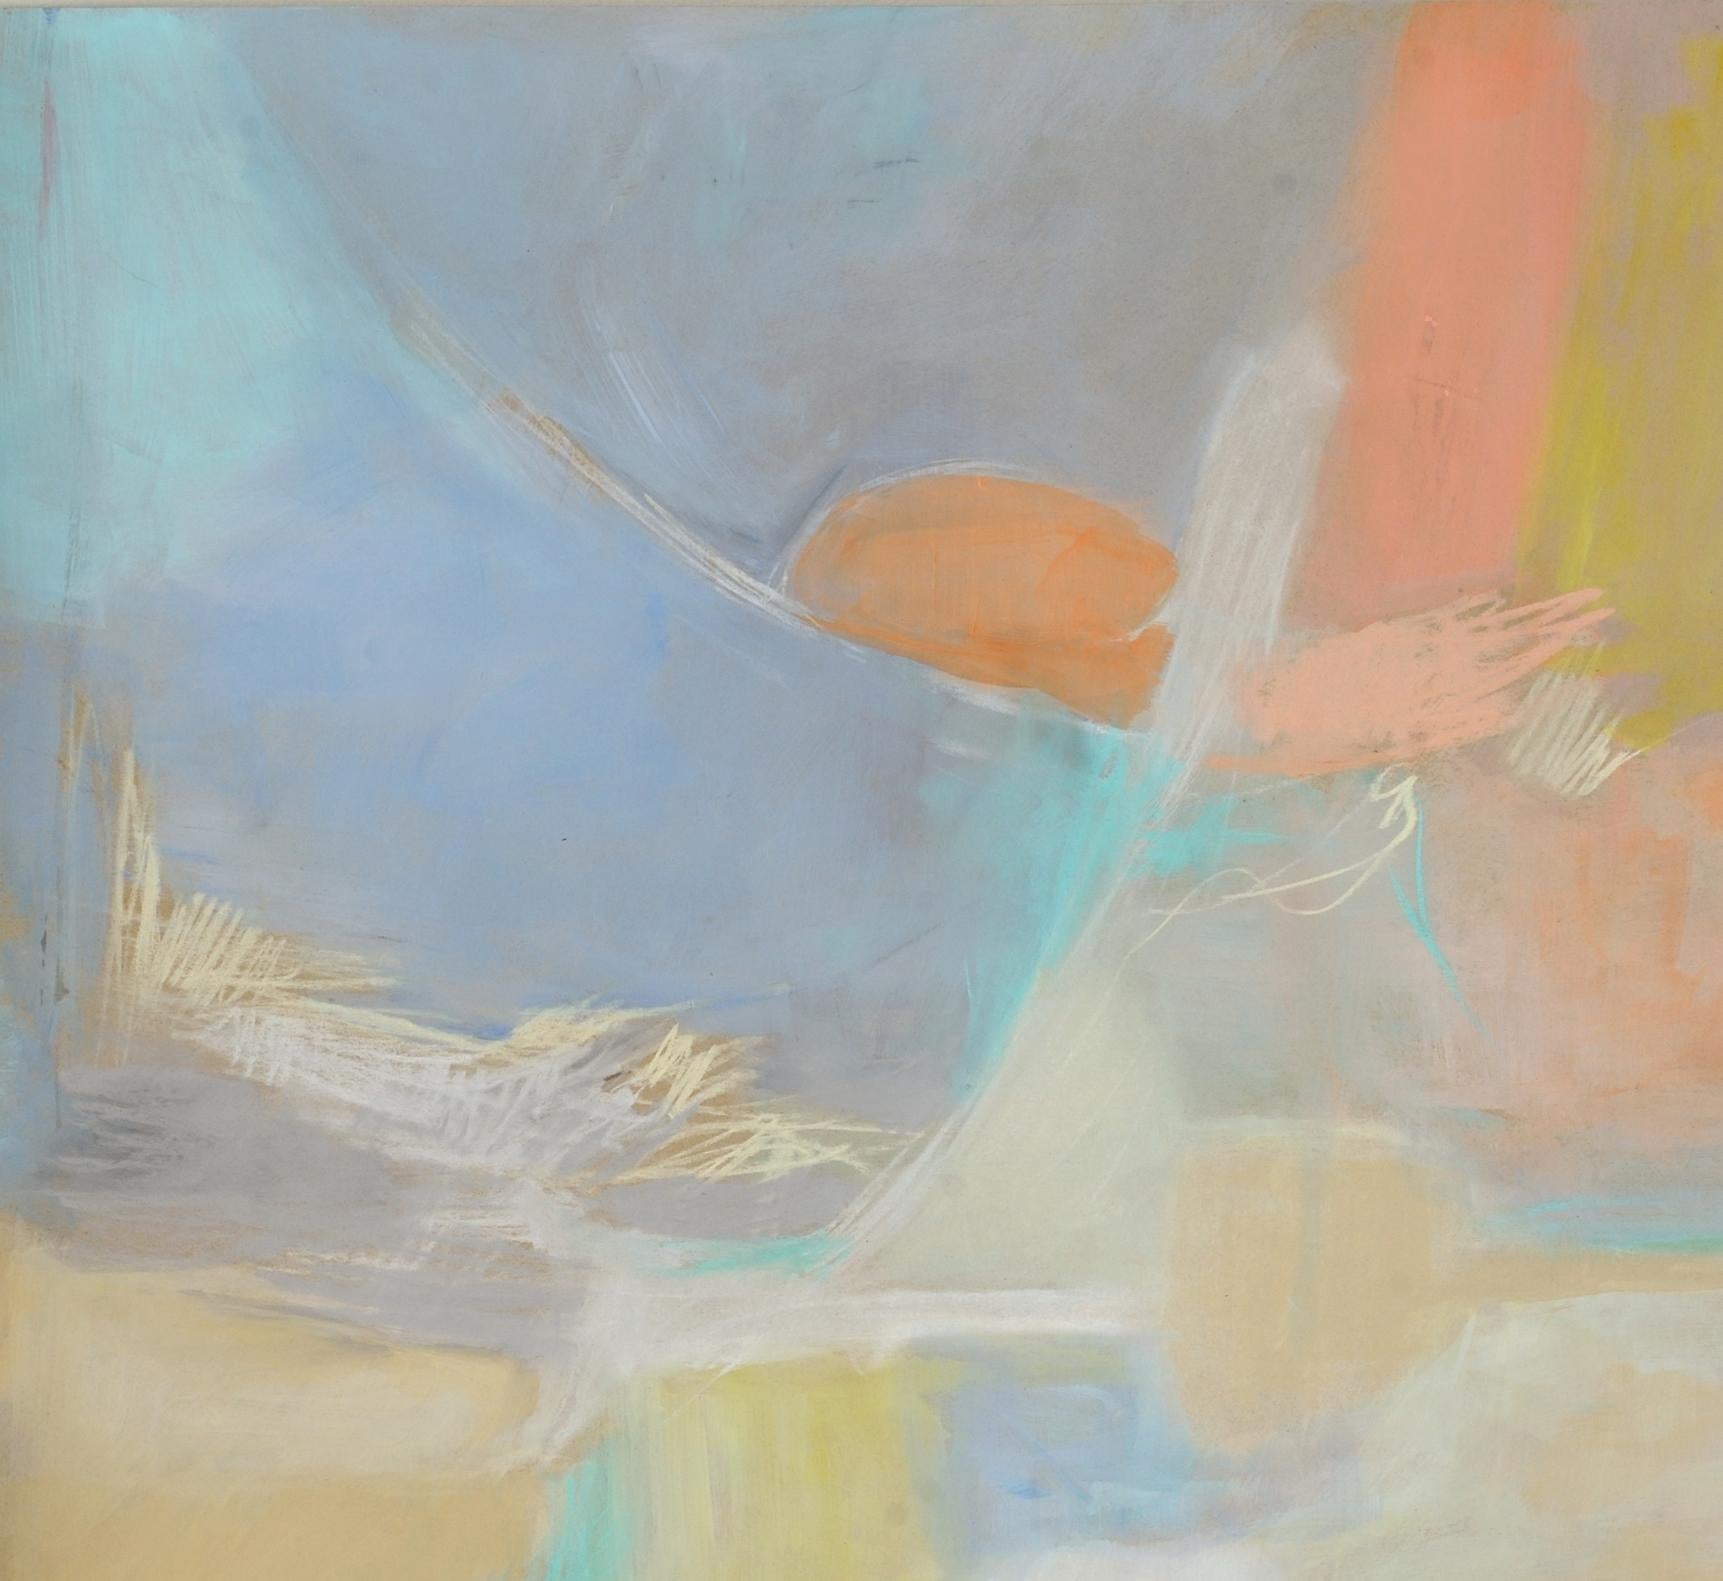 This original painting on paper by Deborah Brisker Burke is signed on the back by the artist. It is unframed. The abstract composition has shades of grey, blue, orange, yellow and pink through out the piece.   

Debbie Brisker Burk's process begins